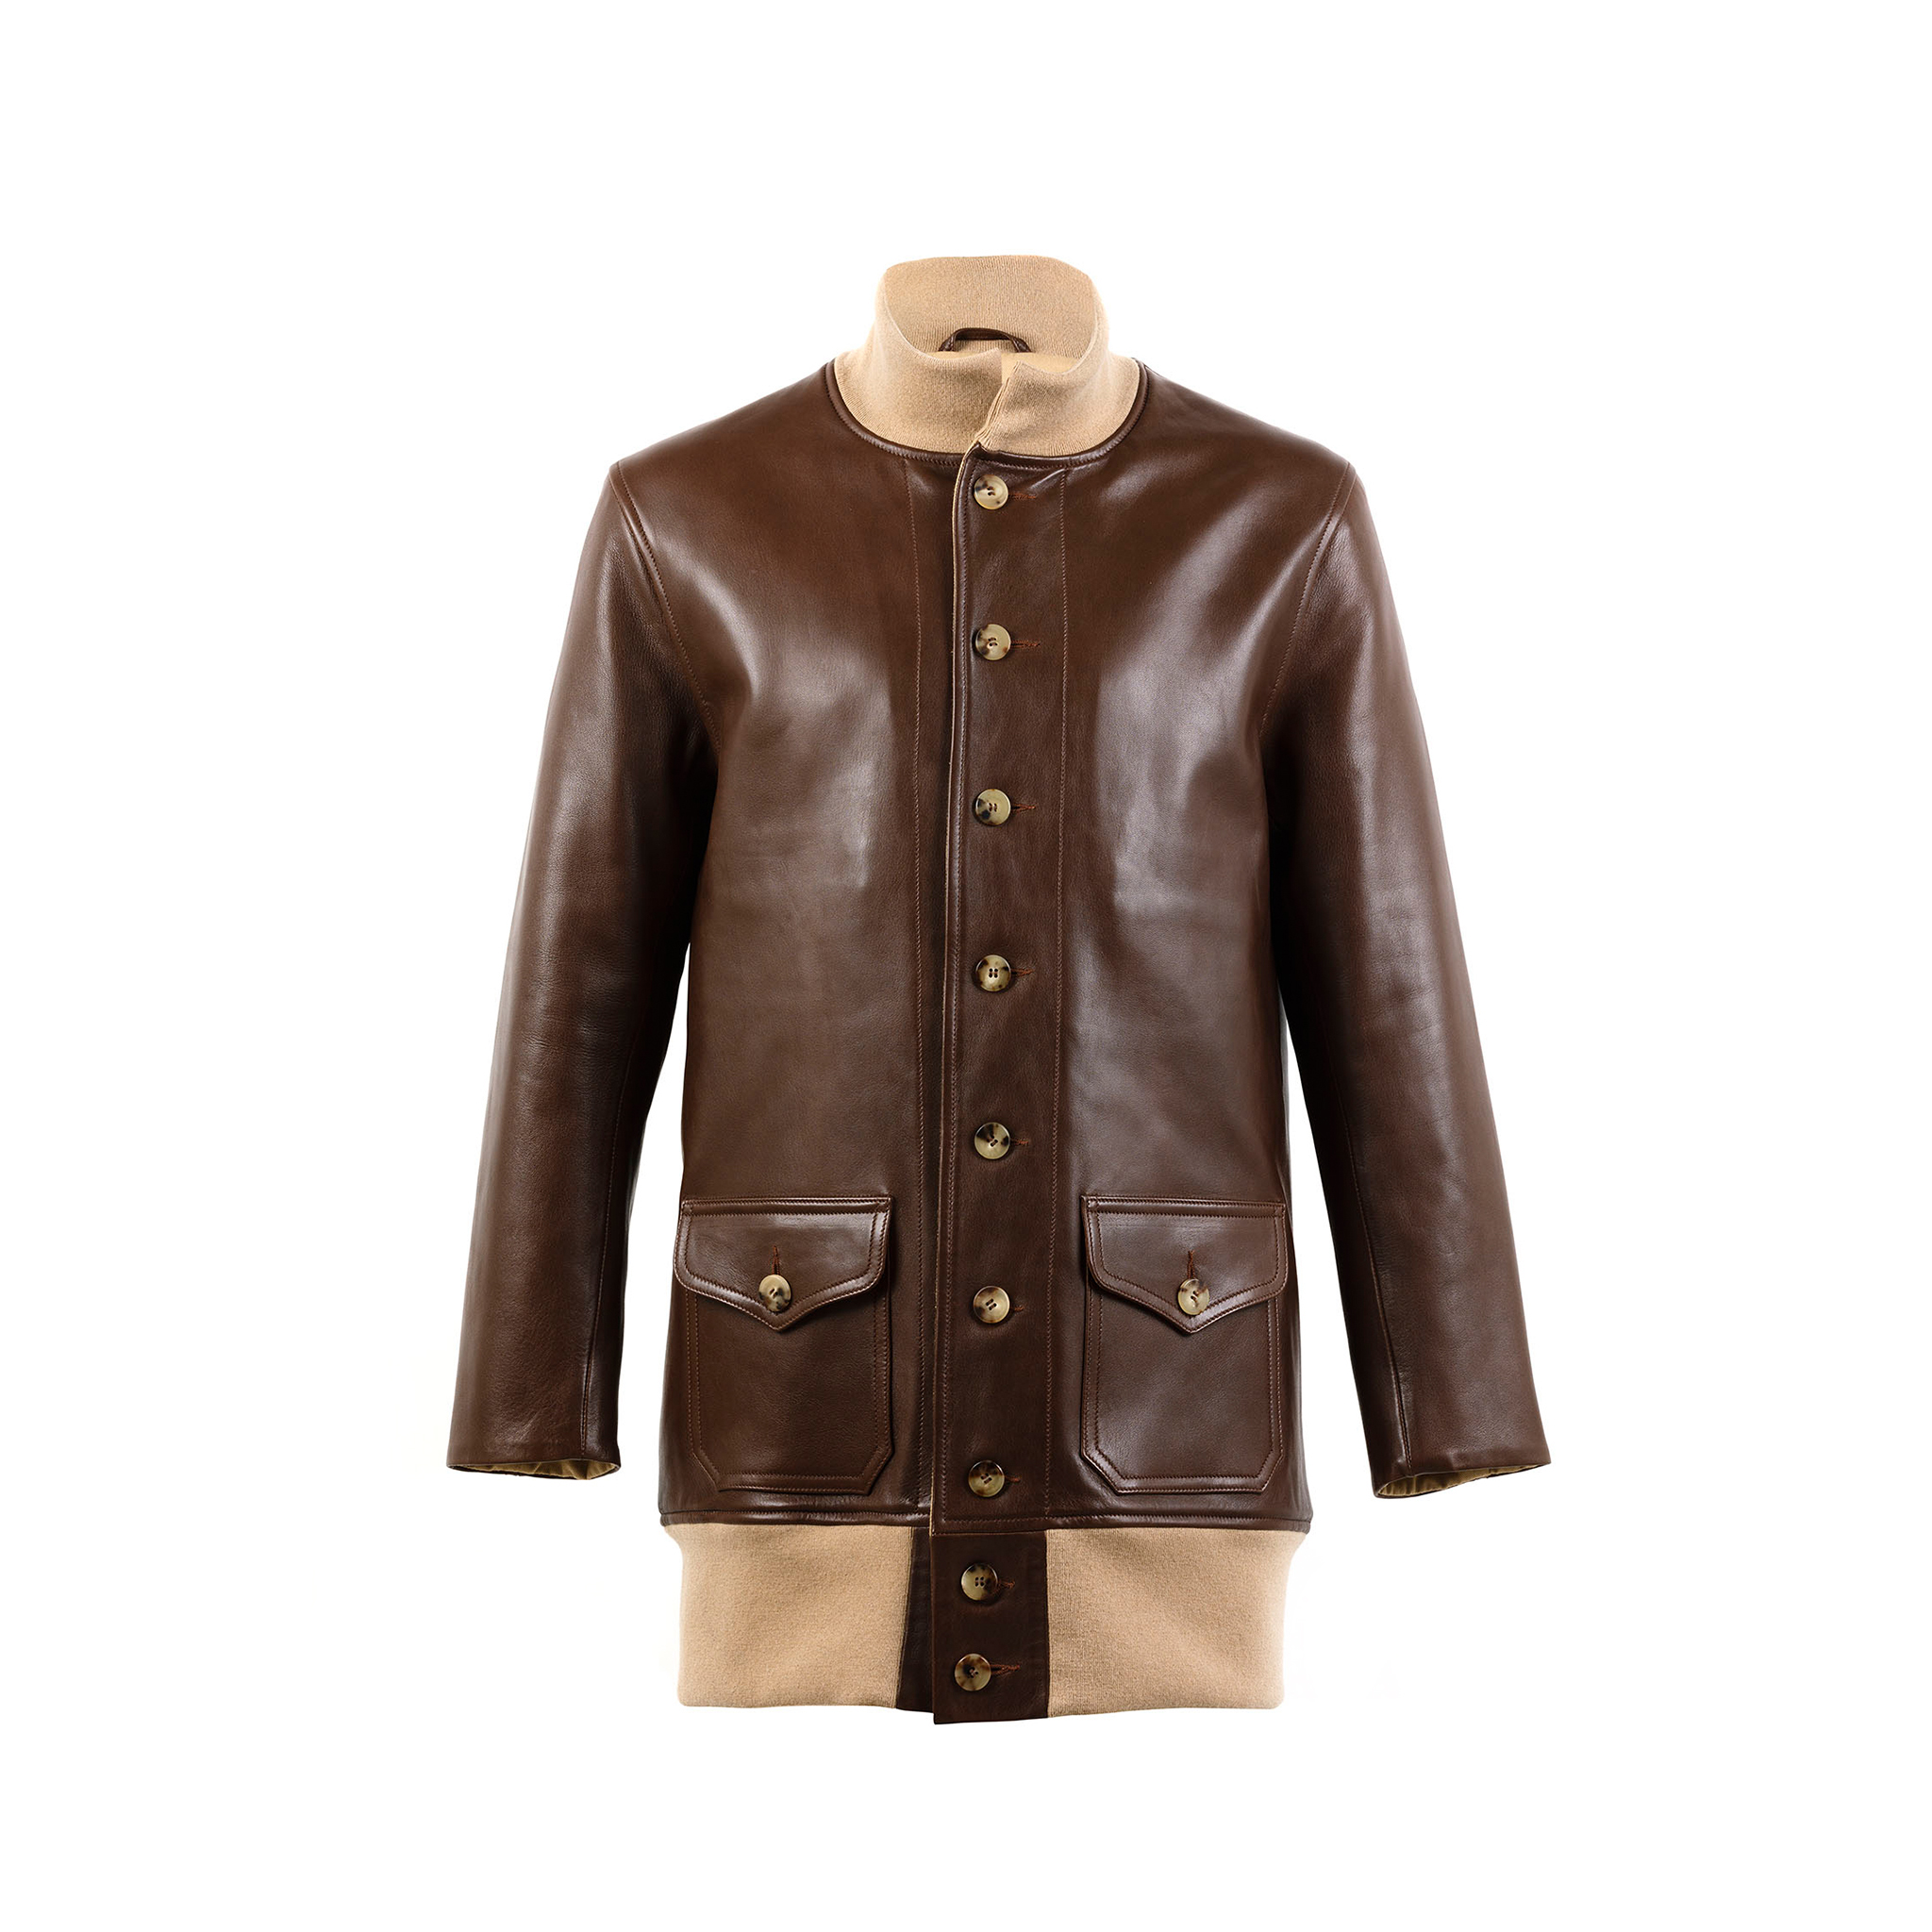 A1 3/4 Coat - Vintage - Glossy leather - Brown color